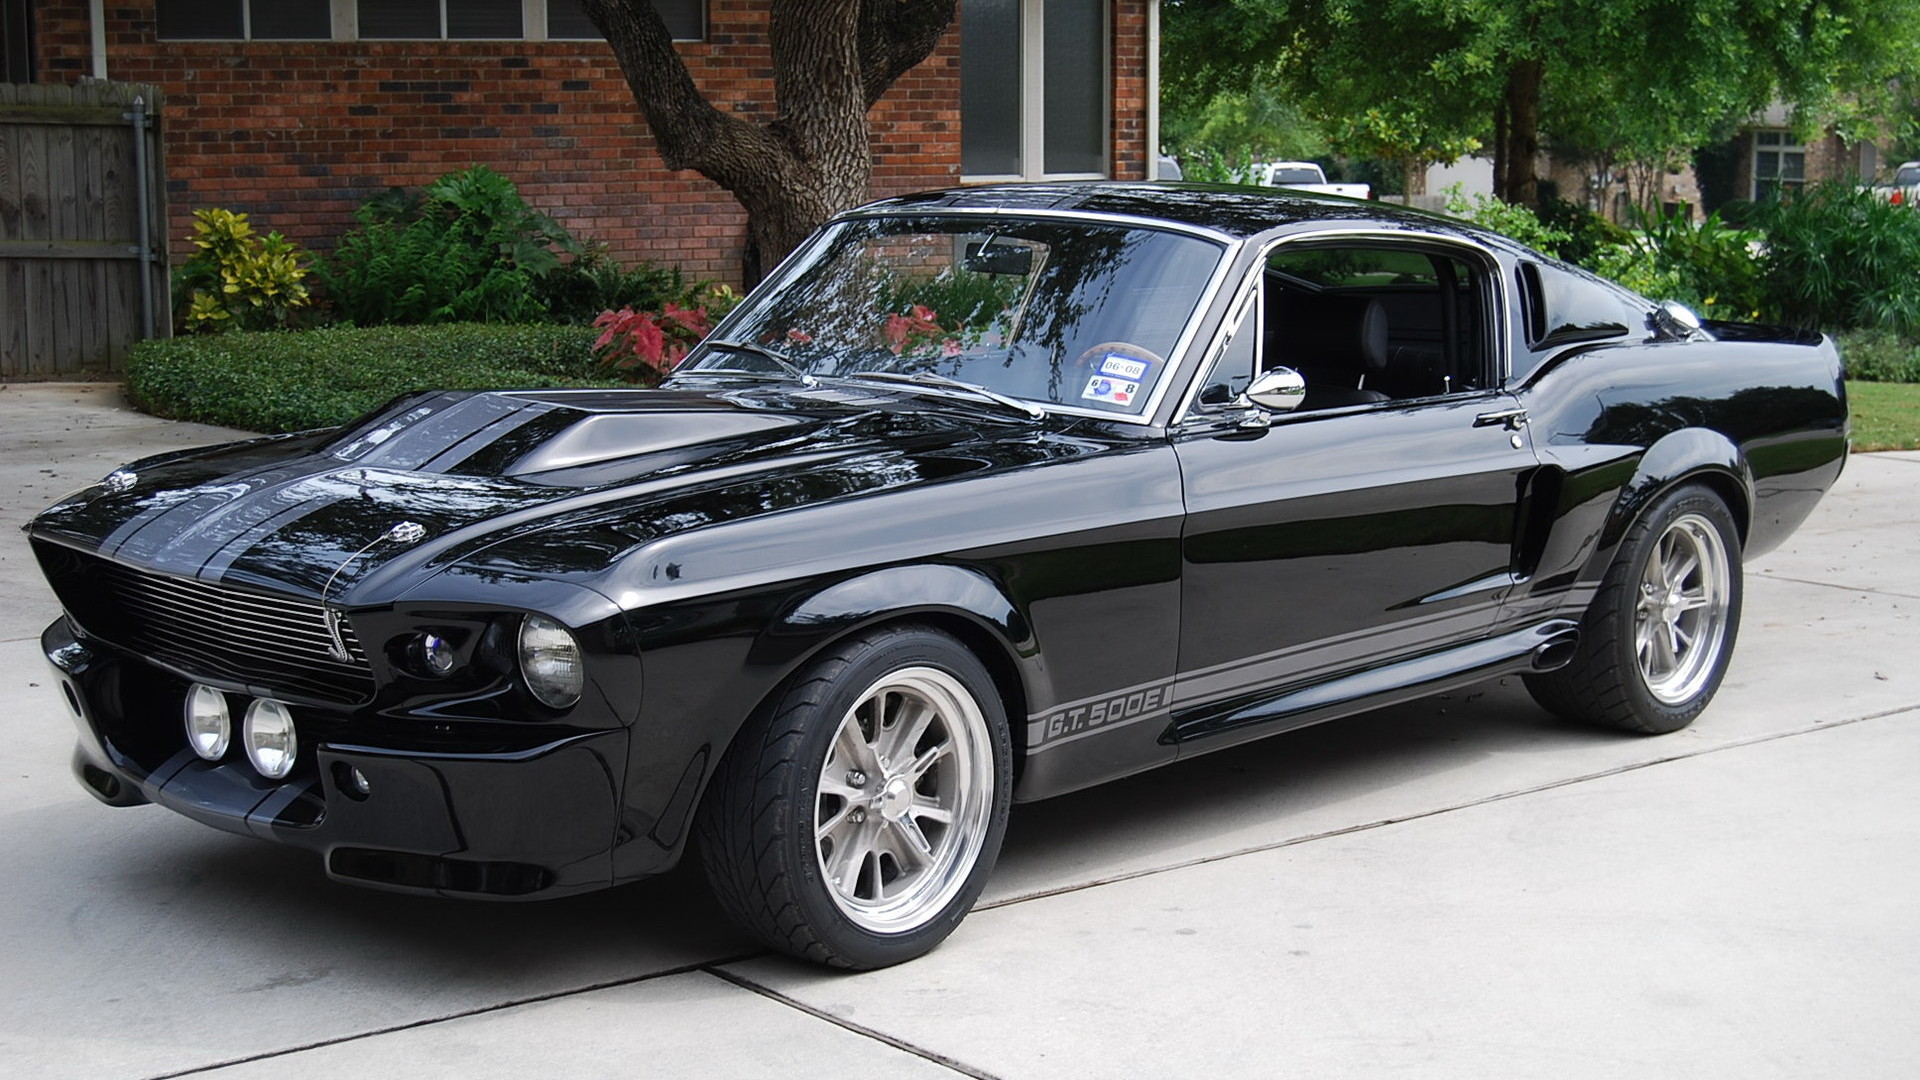 1920x1080 Download Shelby Mustang wallpaper ()